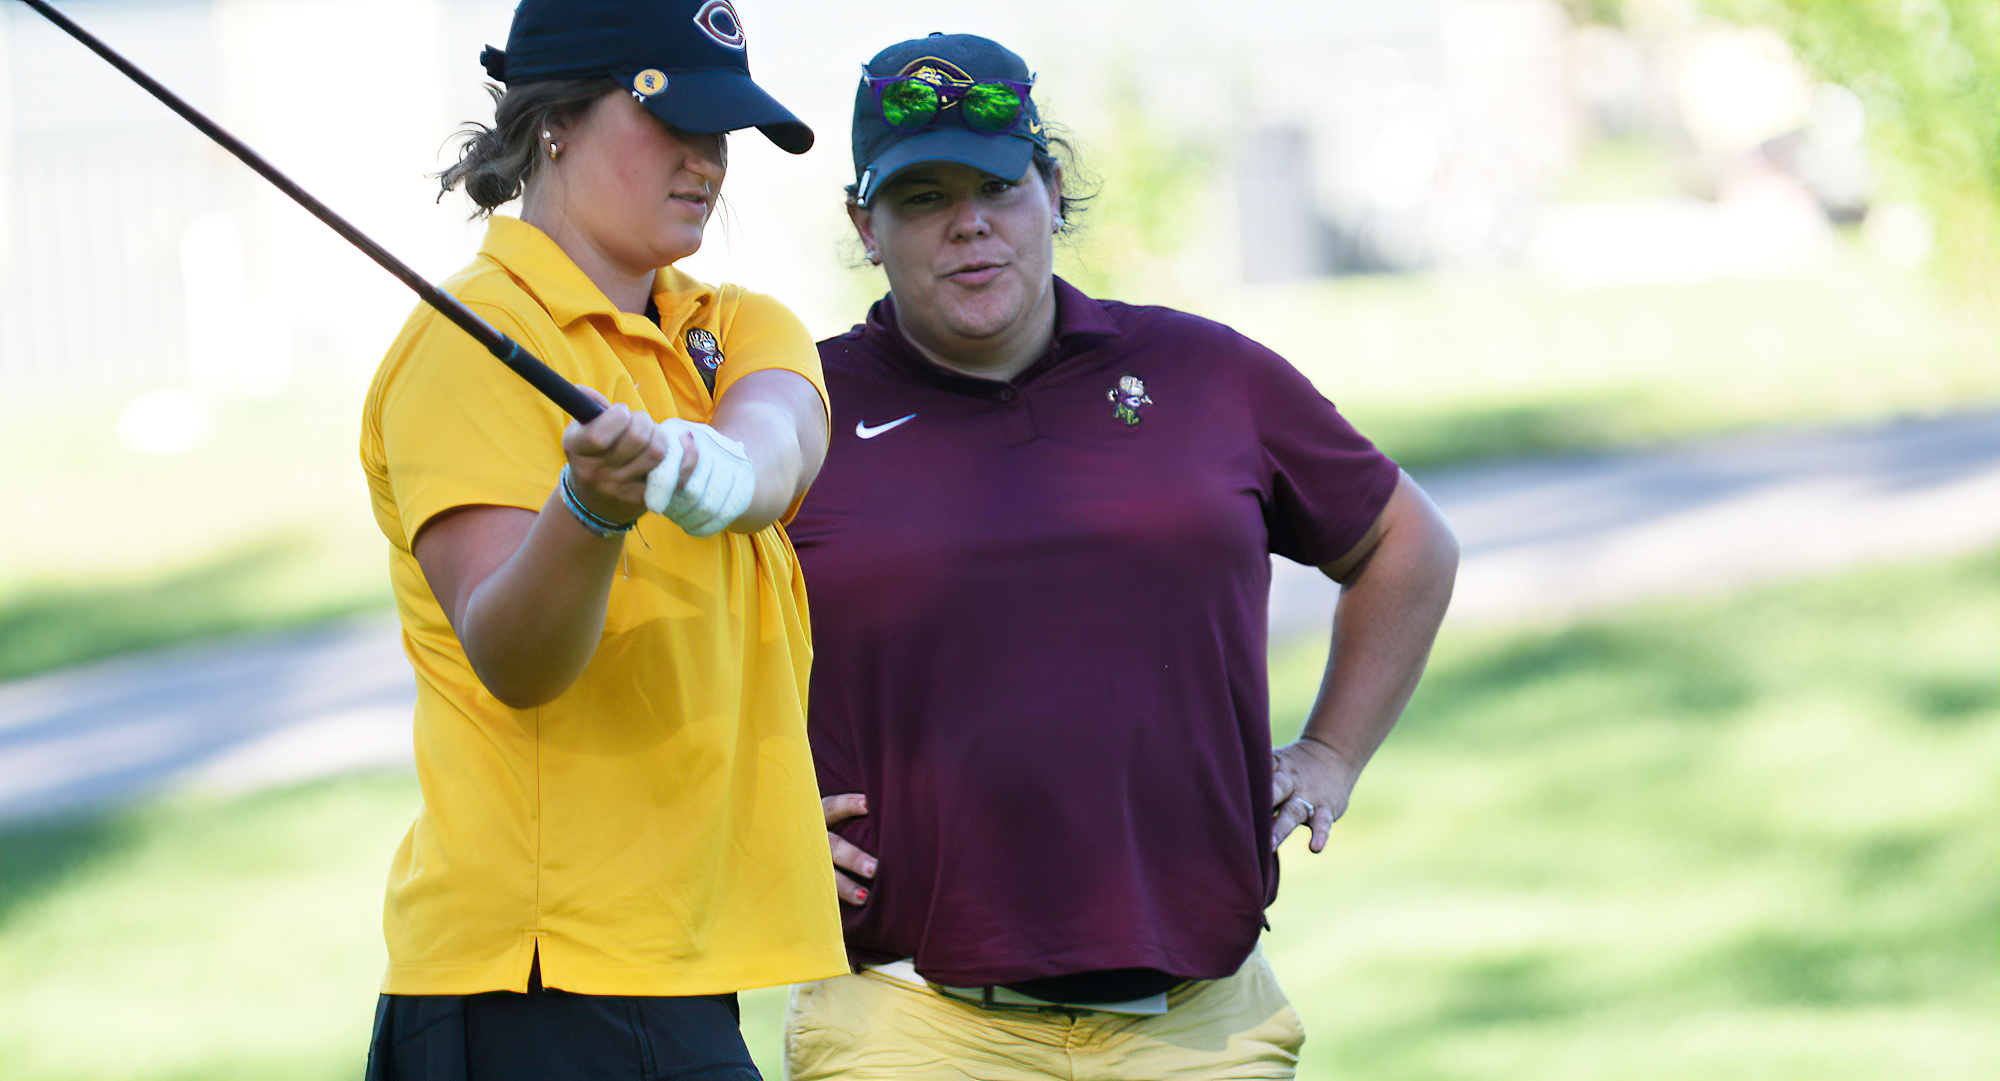 head coach Maureen Greiner previews the upcoming 2022 fall season as the Cobbers return all five athletes from their MIAC team from 2021.